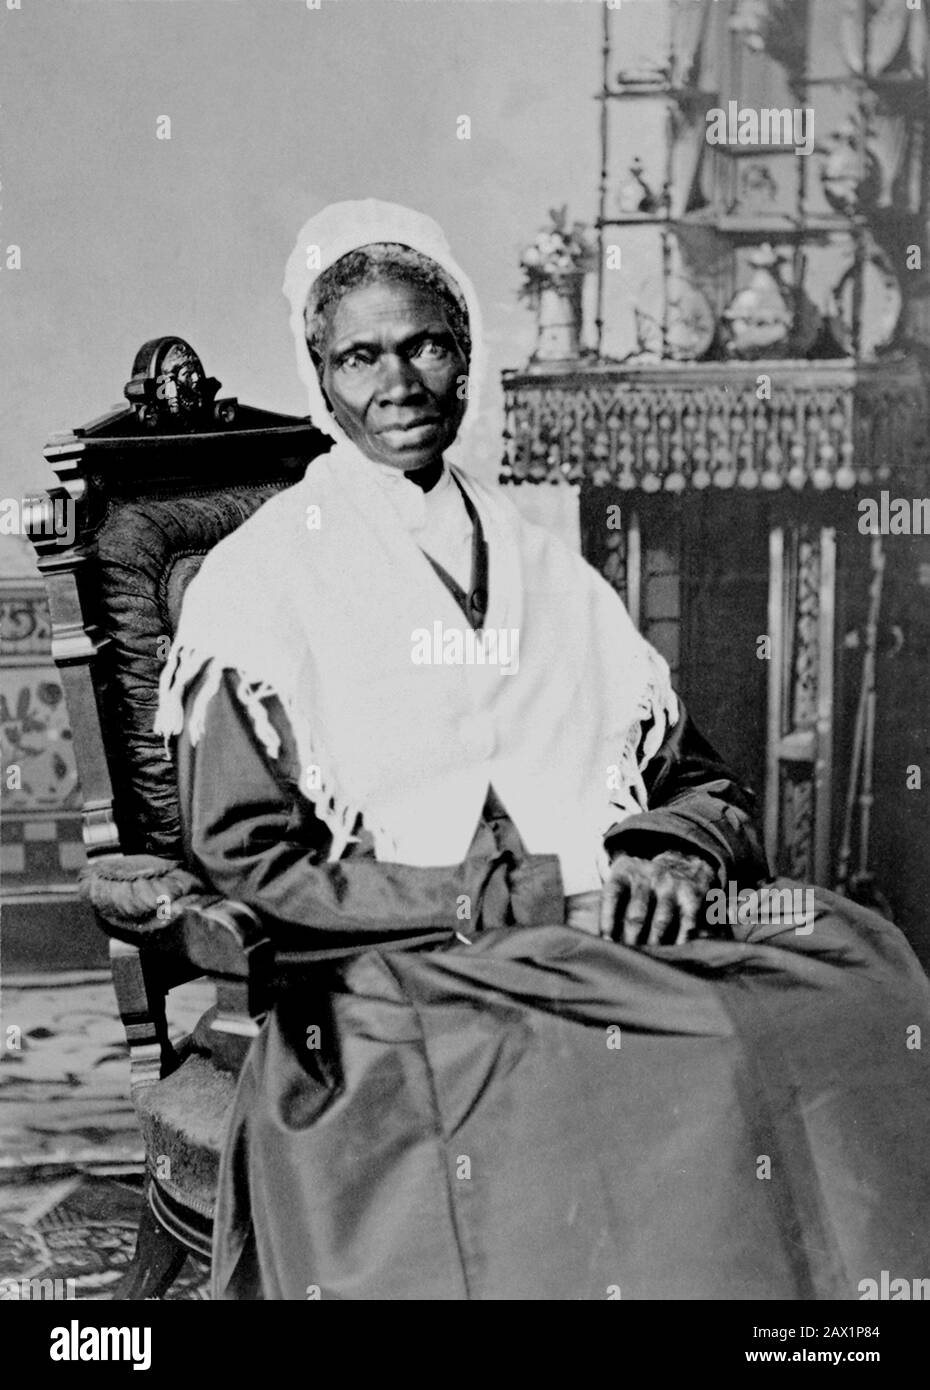 1870 , USA : Portait of Sojourner Truth  , photo by Randall Studio , 1870. The U.S.A. President ABRAHAM LINCOLN ( 1809 - 1865 ) showing Sojourner Truth ( Isabella Baumfree , 1797 - 1883 ) the Bible presented by colored people of Baltimore ,  Executive Mansion , Washington , D.C., Oct. 29, 1864 . Sojourner Truth was the self-given name, from 1843 onward, of Isabella Baumfree, an African-American abolitionist and women's rights activist. Truth was born into slavery in Swartekill, Ulster County, New York, but escaped with her infant daughter to freedom in 1826. After going to court to recover her Stock Photo